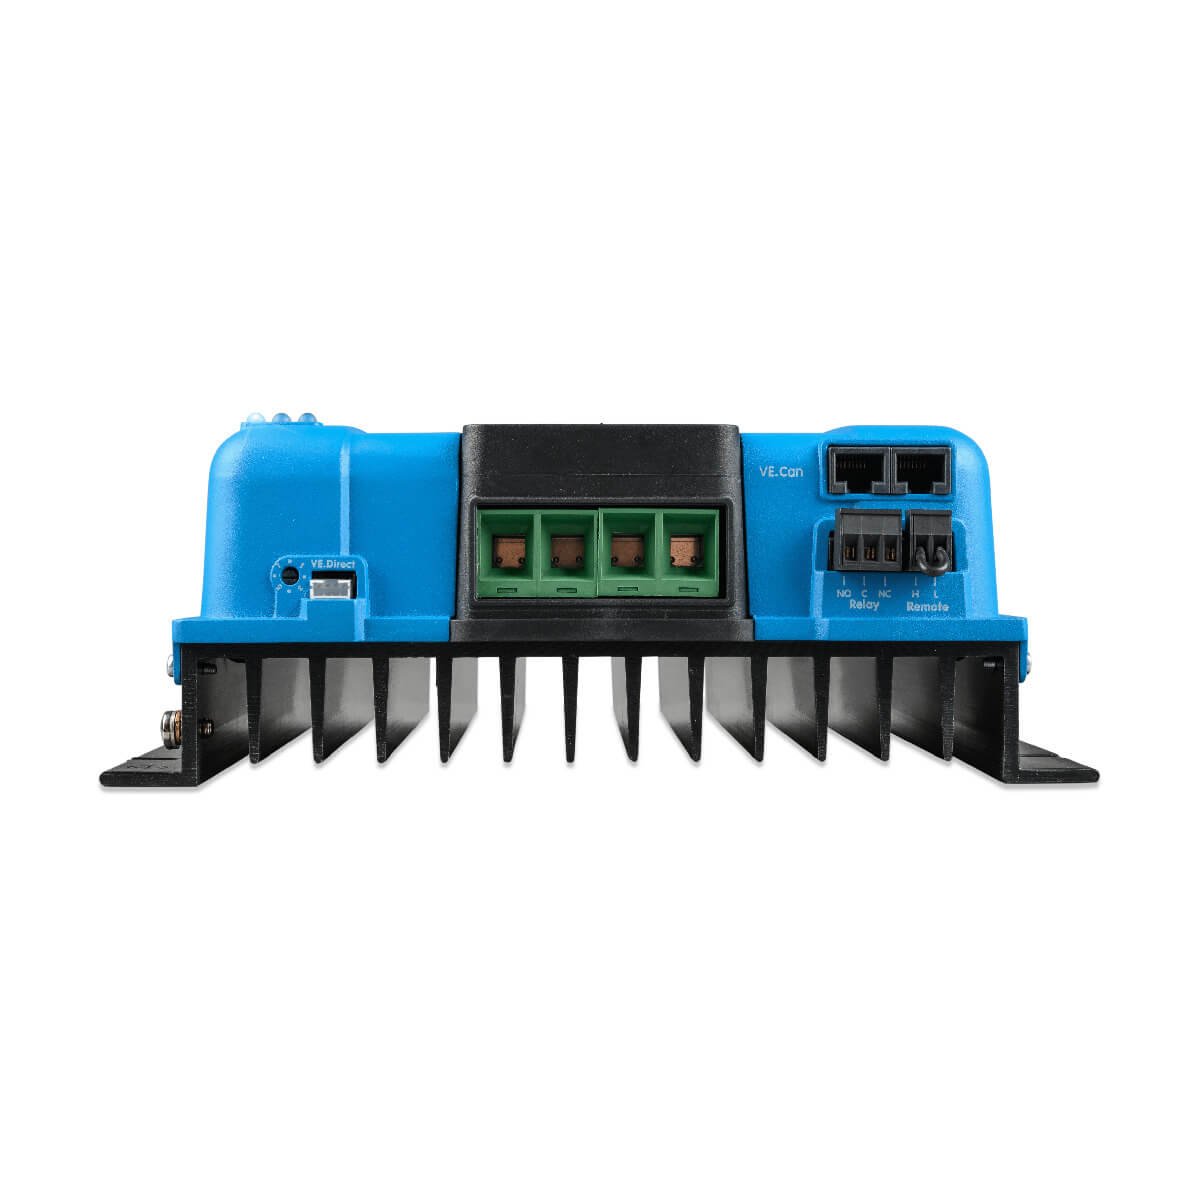 Blue electronic device with black cooling fins, green connectors, and multiple ports on top.